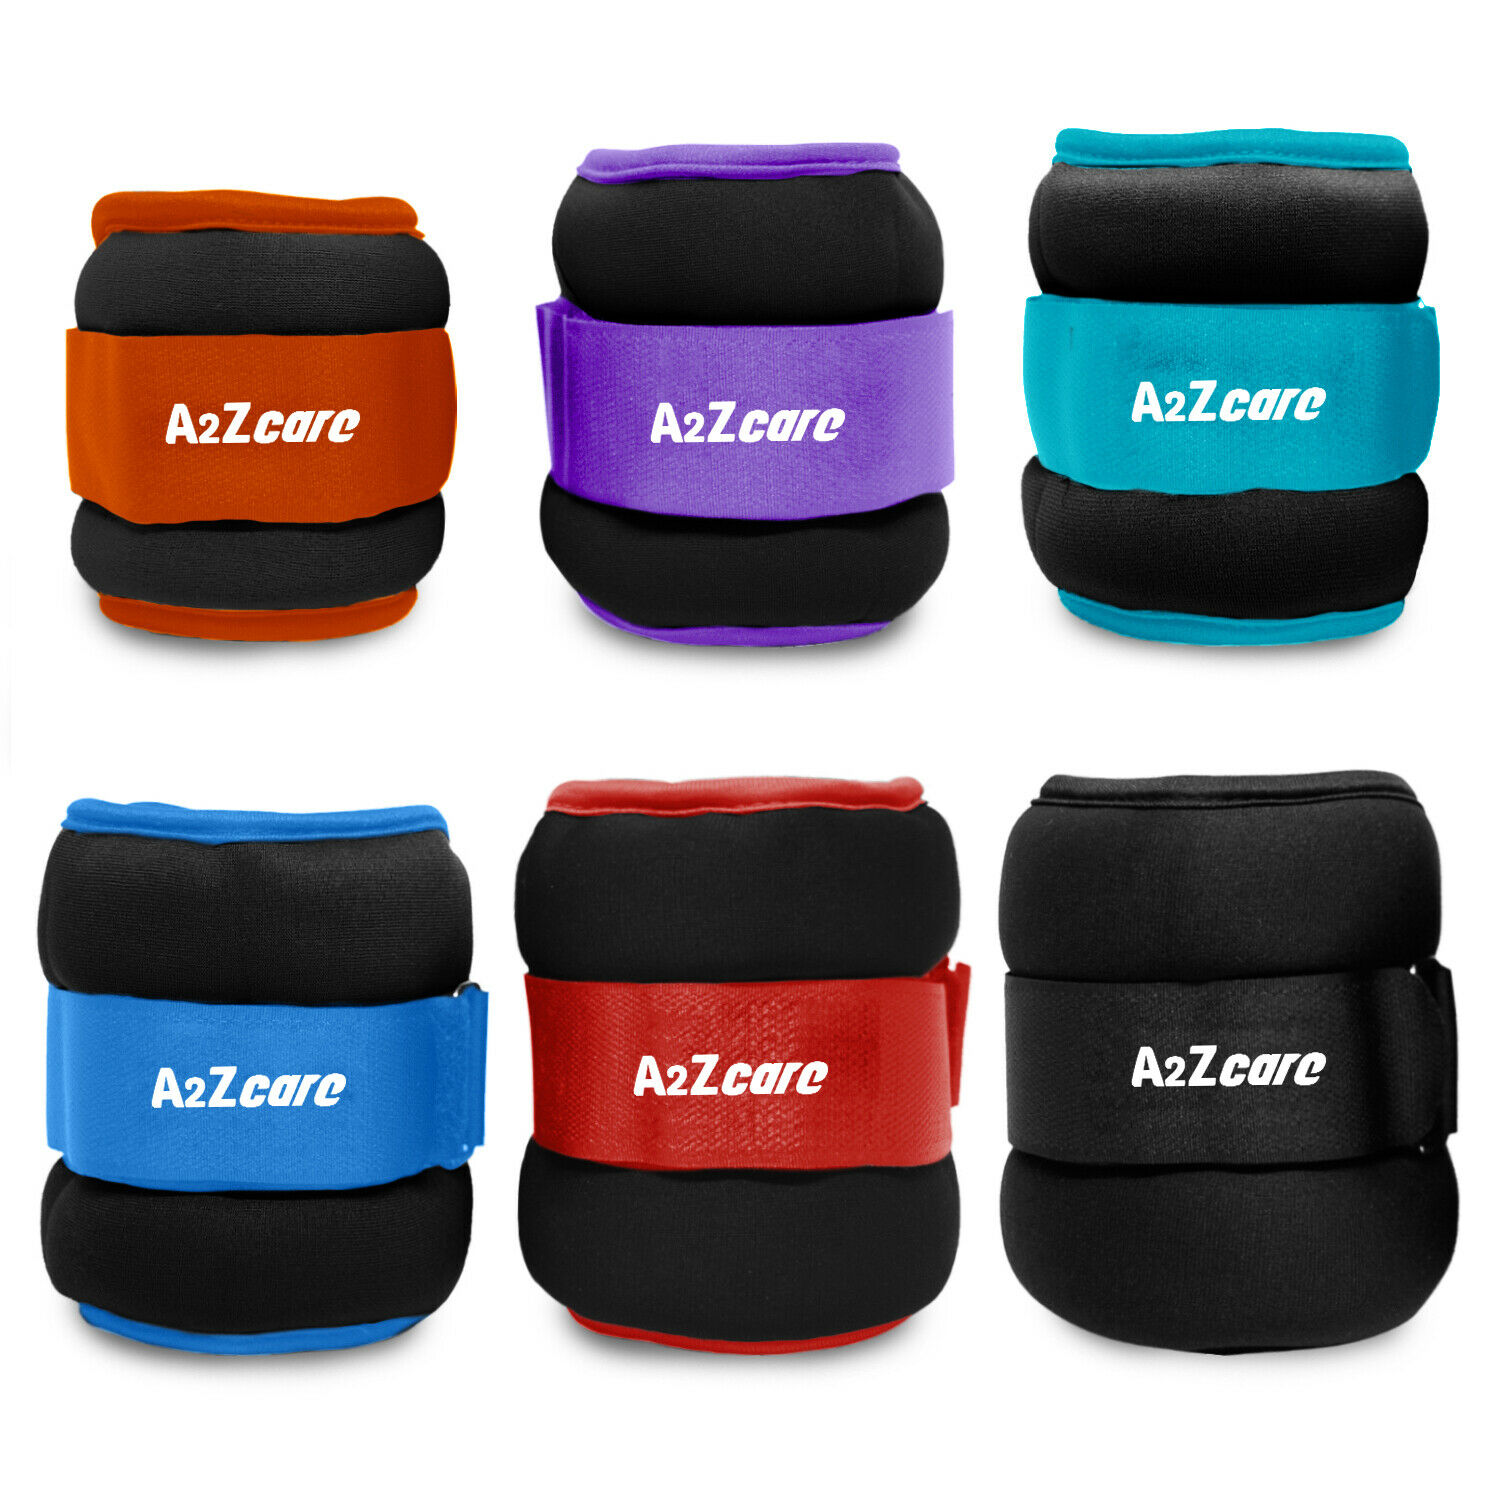 A2zcare Ankle Weights Fitness, Strength Exercise Training 1-5lbs (sold As Pair)